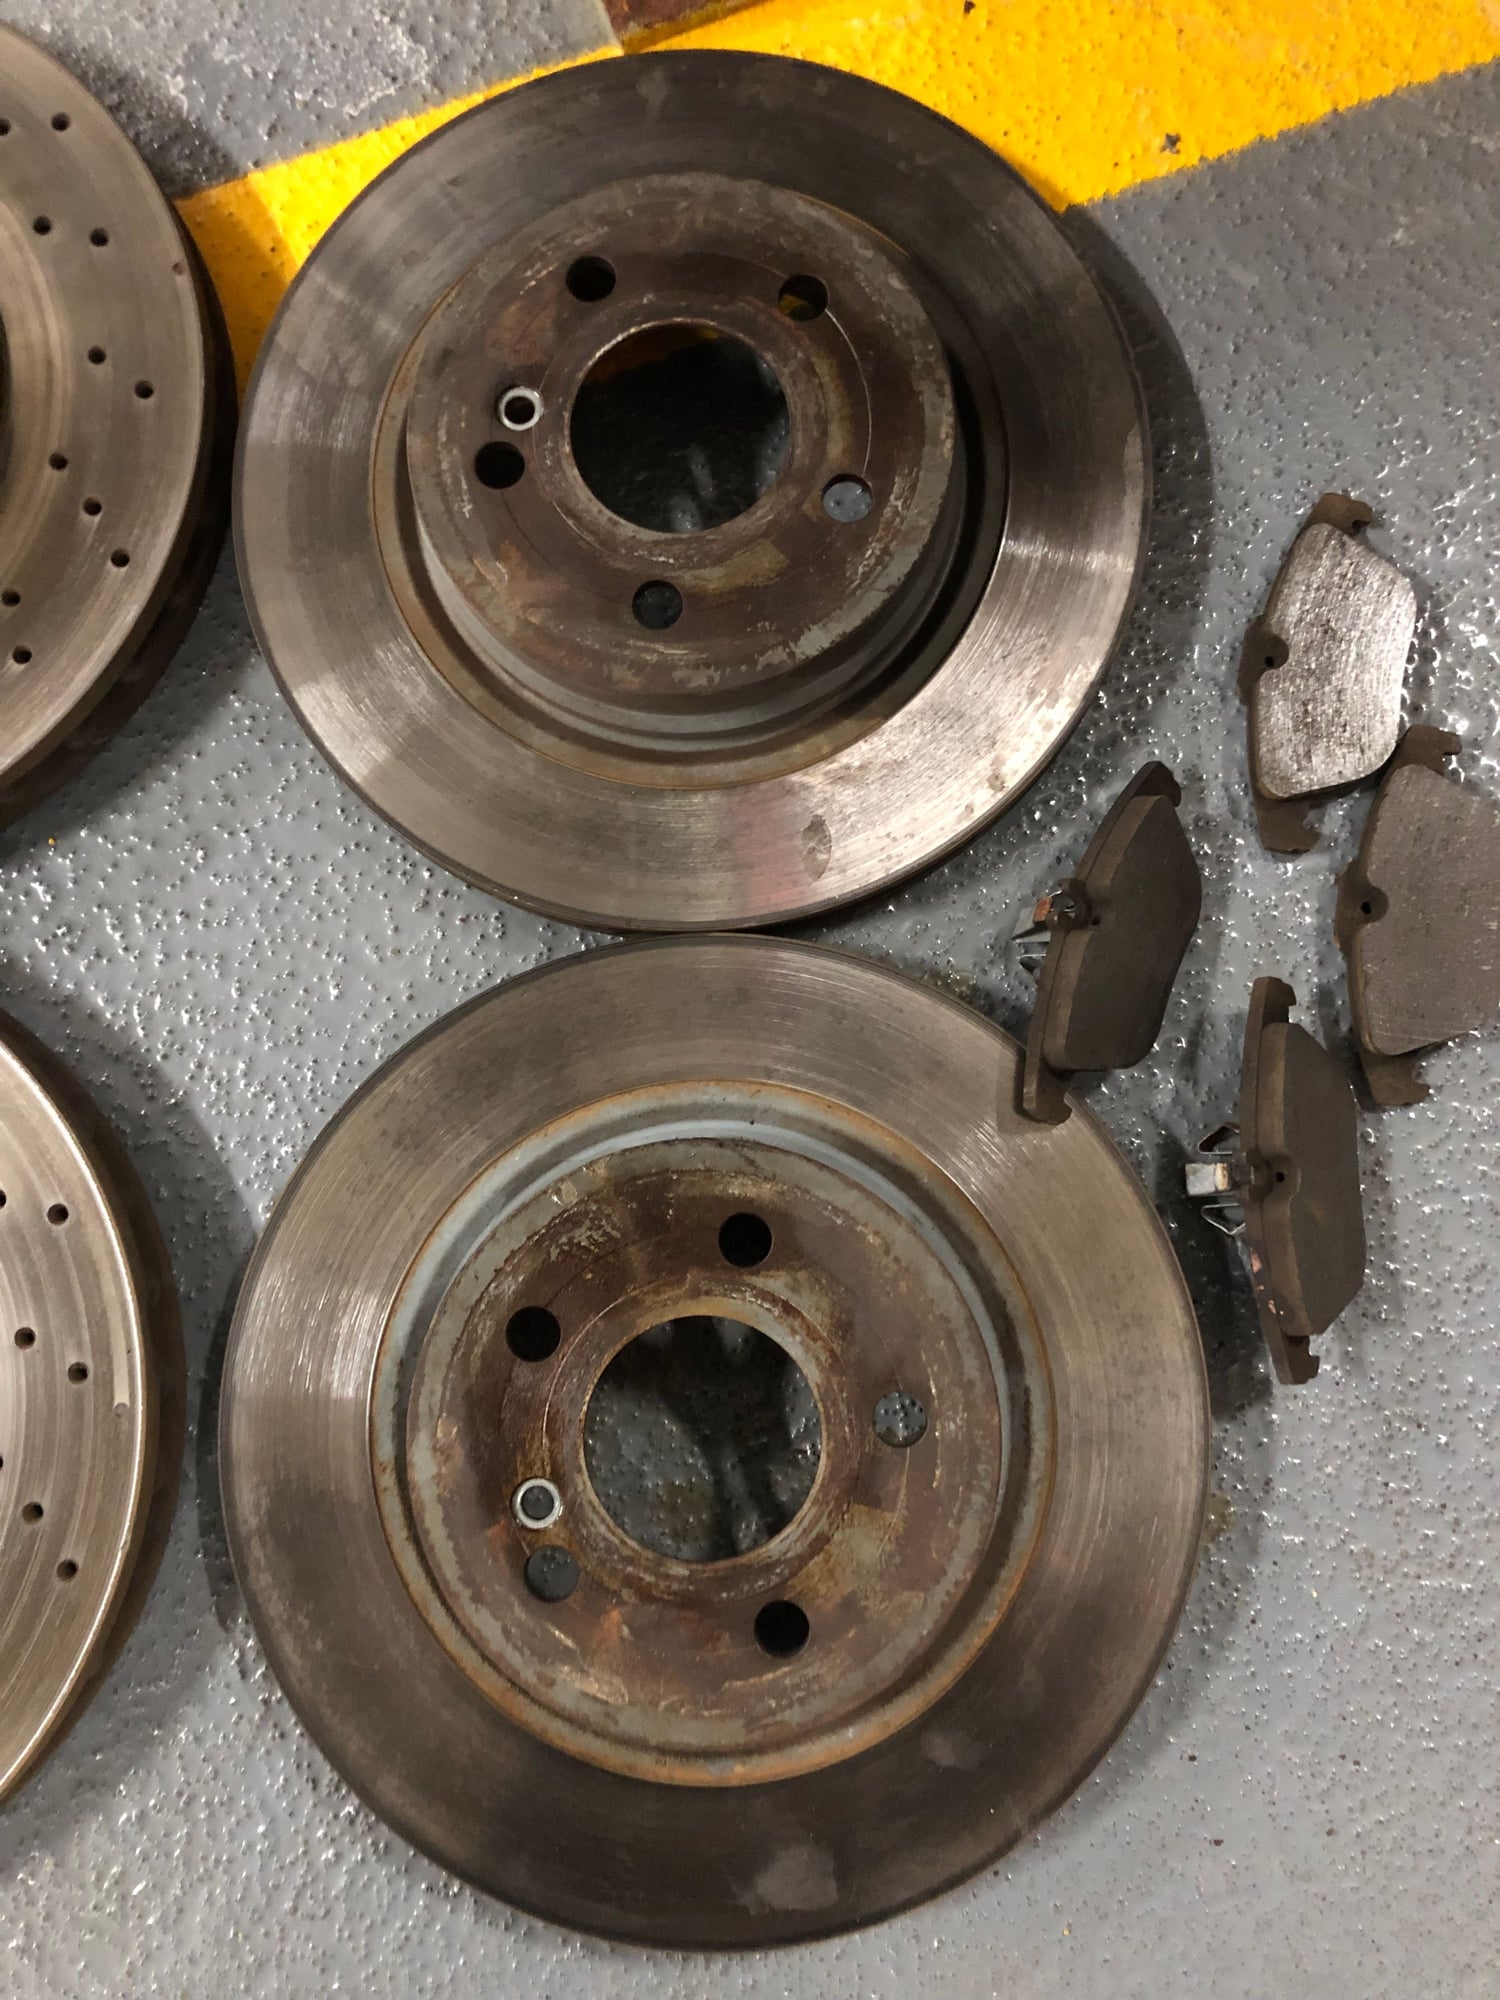 Brakes - Front & Rear Rotors and Pads 2014 C300 with 46,654miles - Used - 2012 to 2014 Mercedes-Benz C300 - Chicago, IL 60605, United States